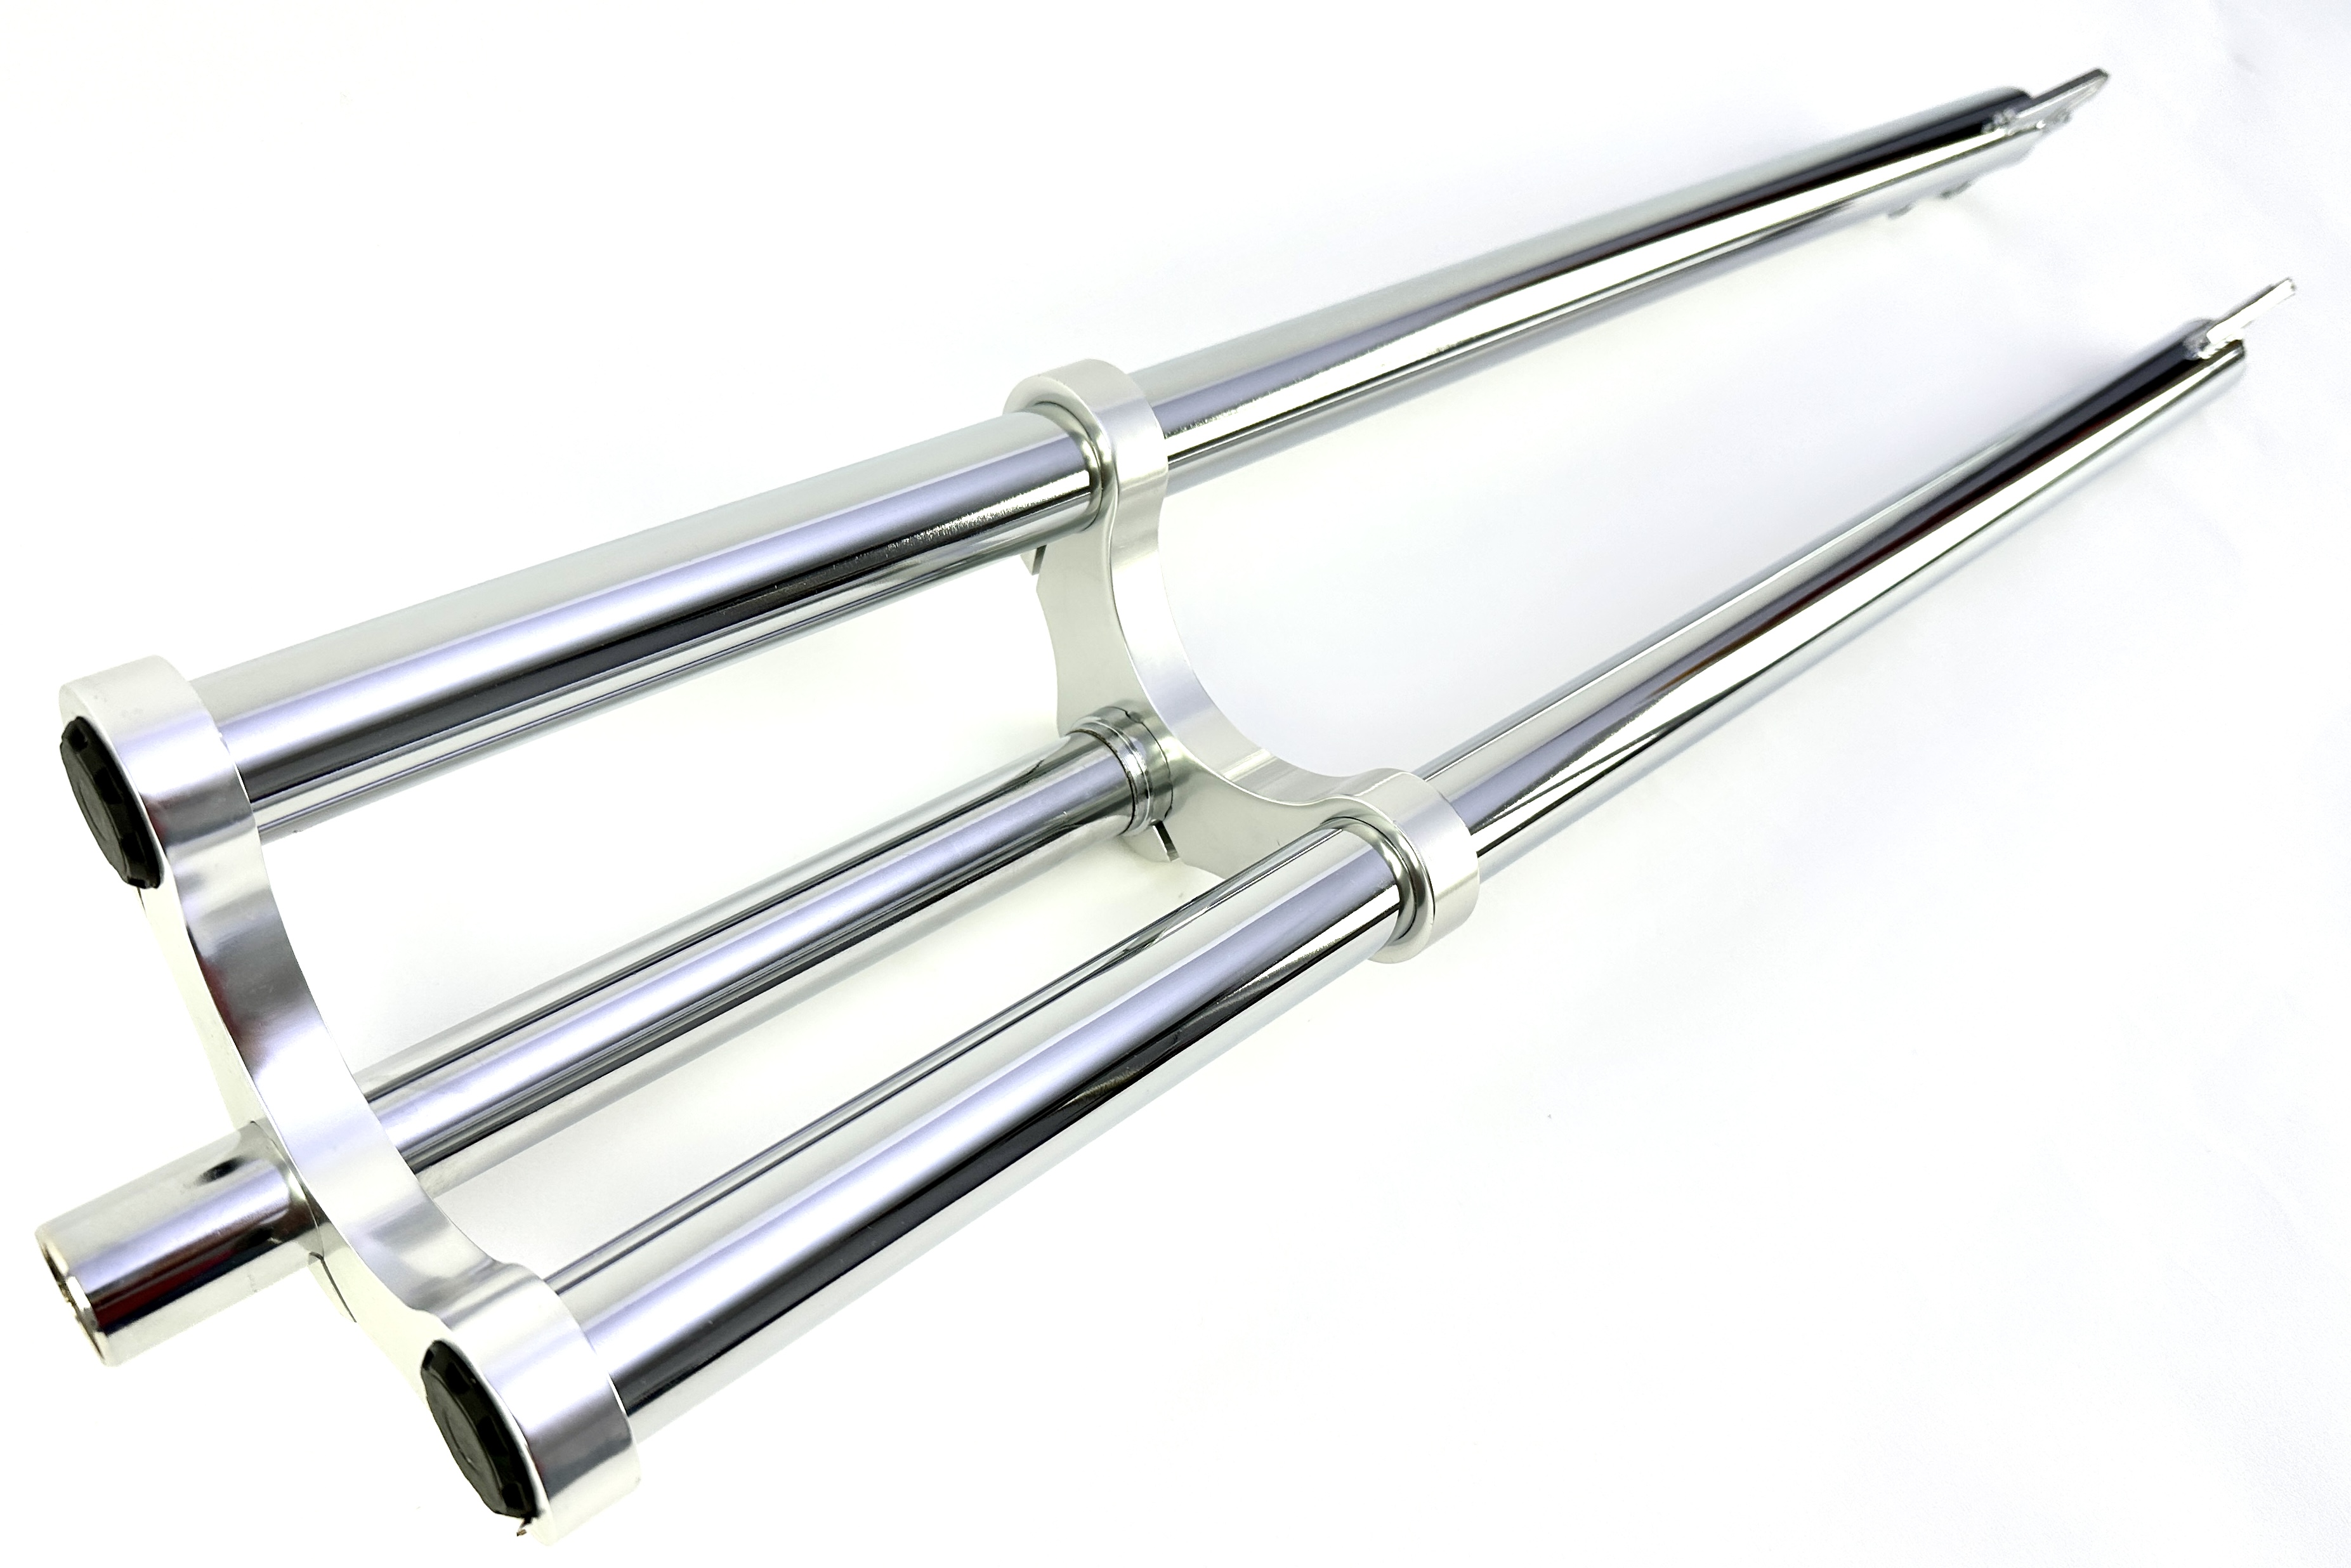 1-Double crown fork 570 mm chrome plated 1 inch shaft